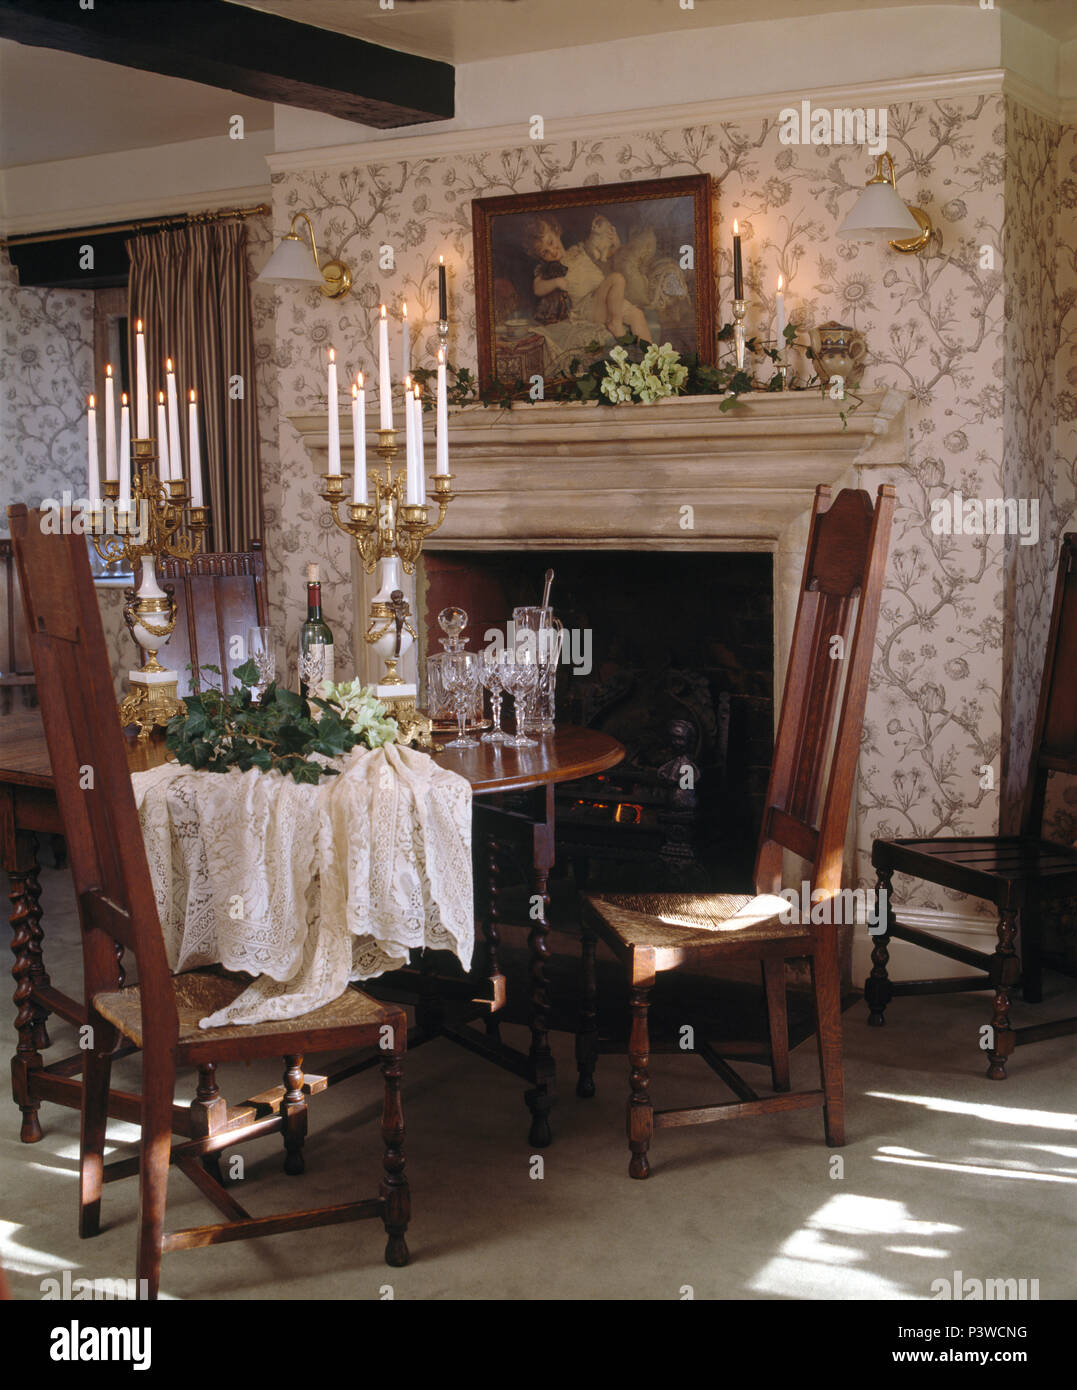 Antique Chairs And Table In Victorian Style Dining Room With Patterned Wallpaper Stock Photo Alamy